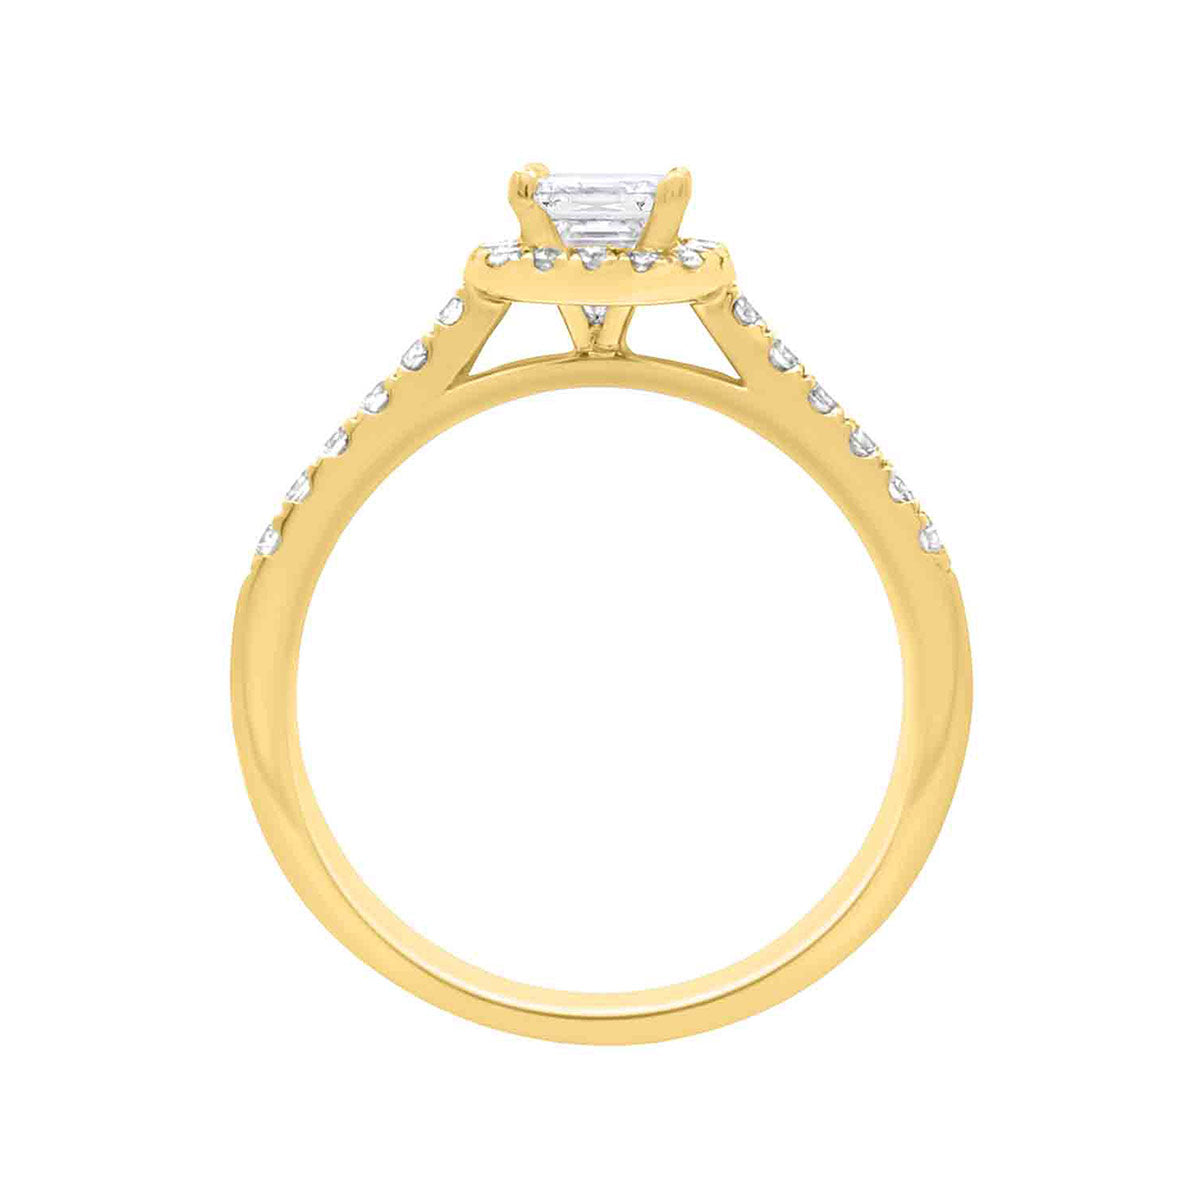 Asscher Halo Diamond Ring in yellow gold pictured upstanding